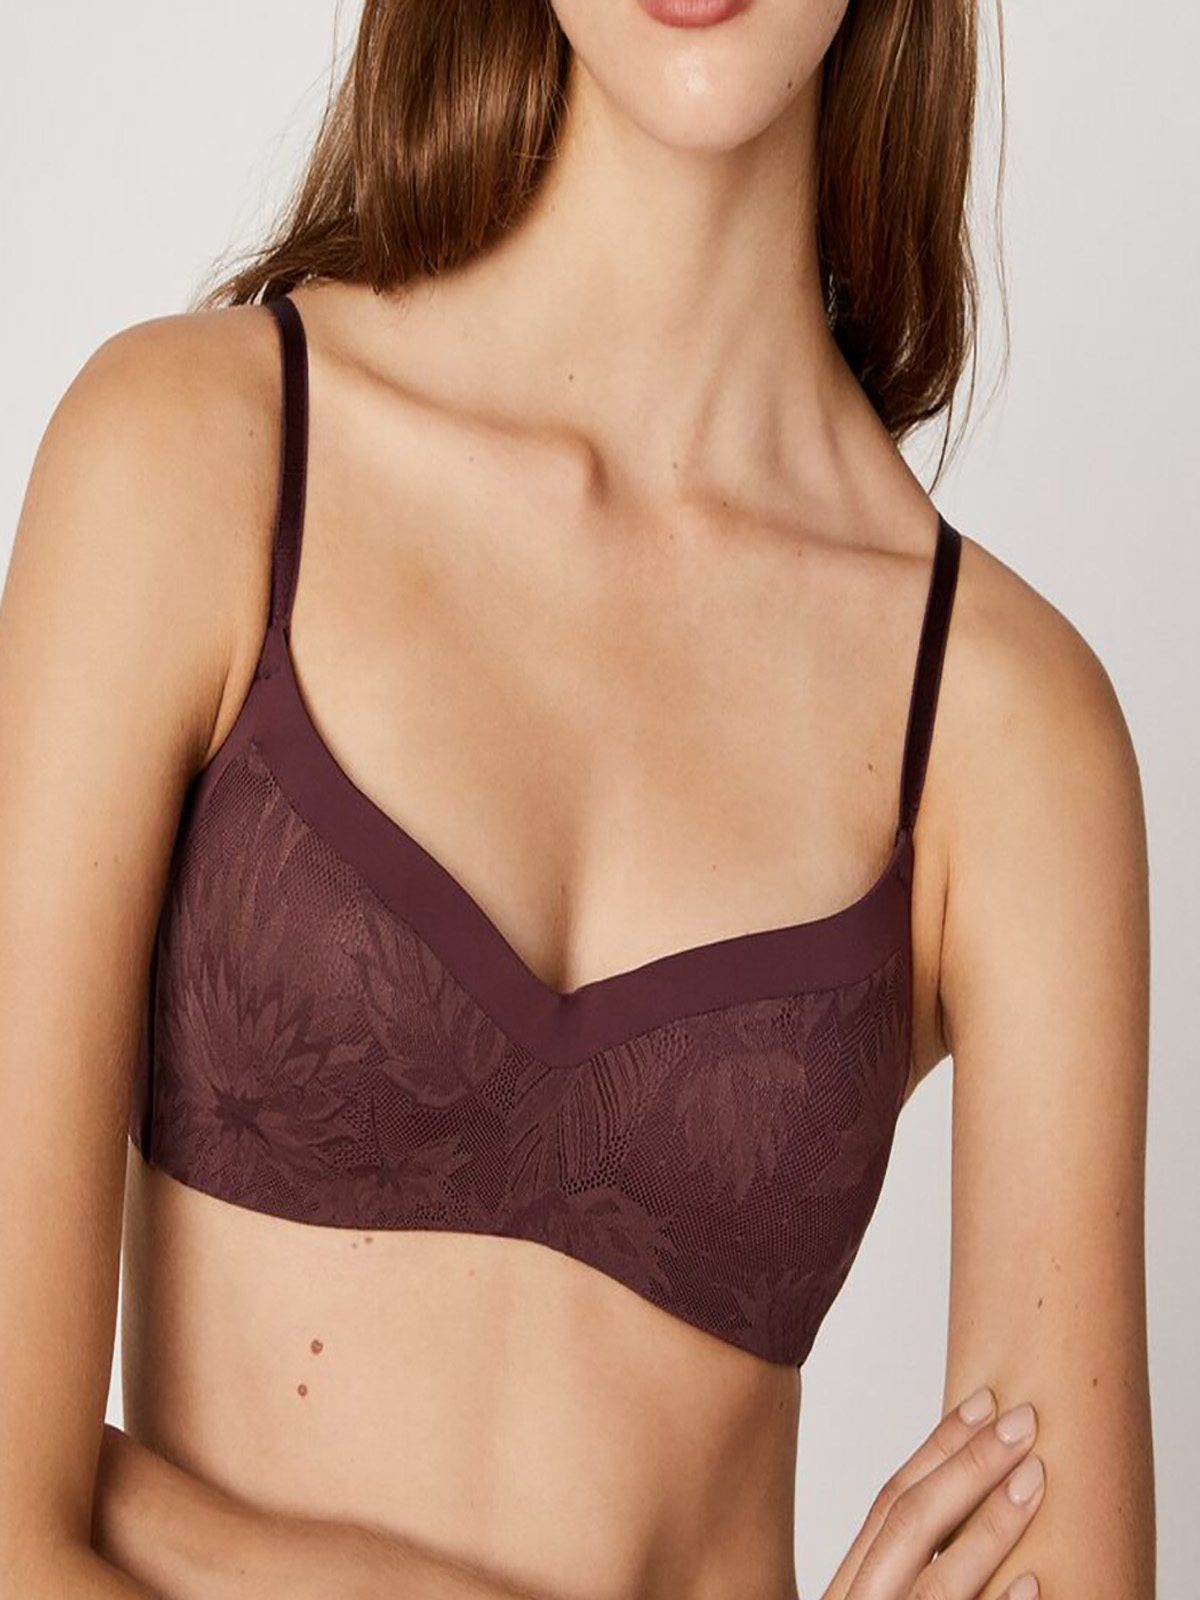 Wholesale Lingerie Spanish Brand Oysho - - OYSHO BURGUNDY Lace Moulded Cup  Non-Wired Bra - Size 32 to 36 (B cup)